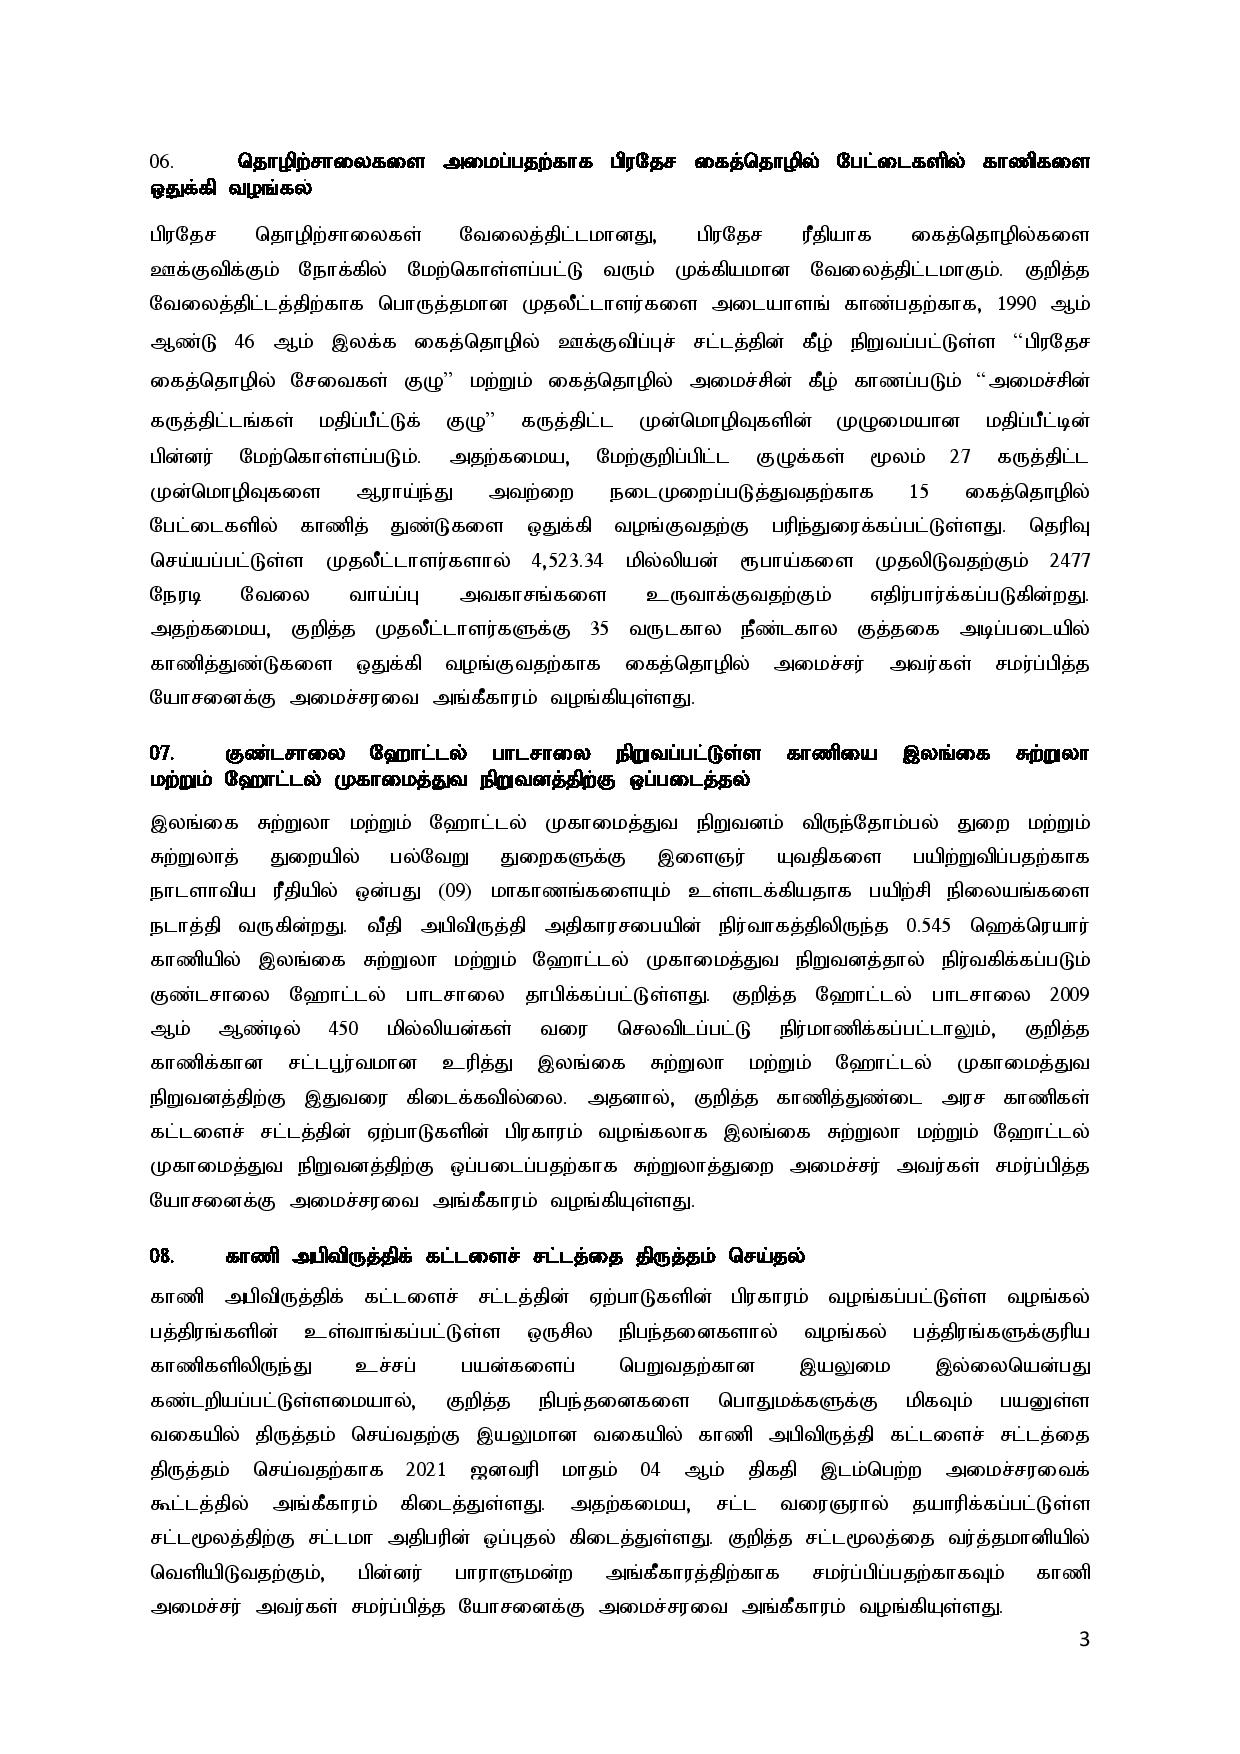 Cabinet Decisions on 13.12.2021 Tamil page 003